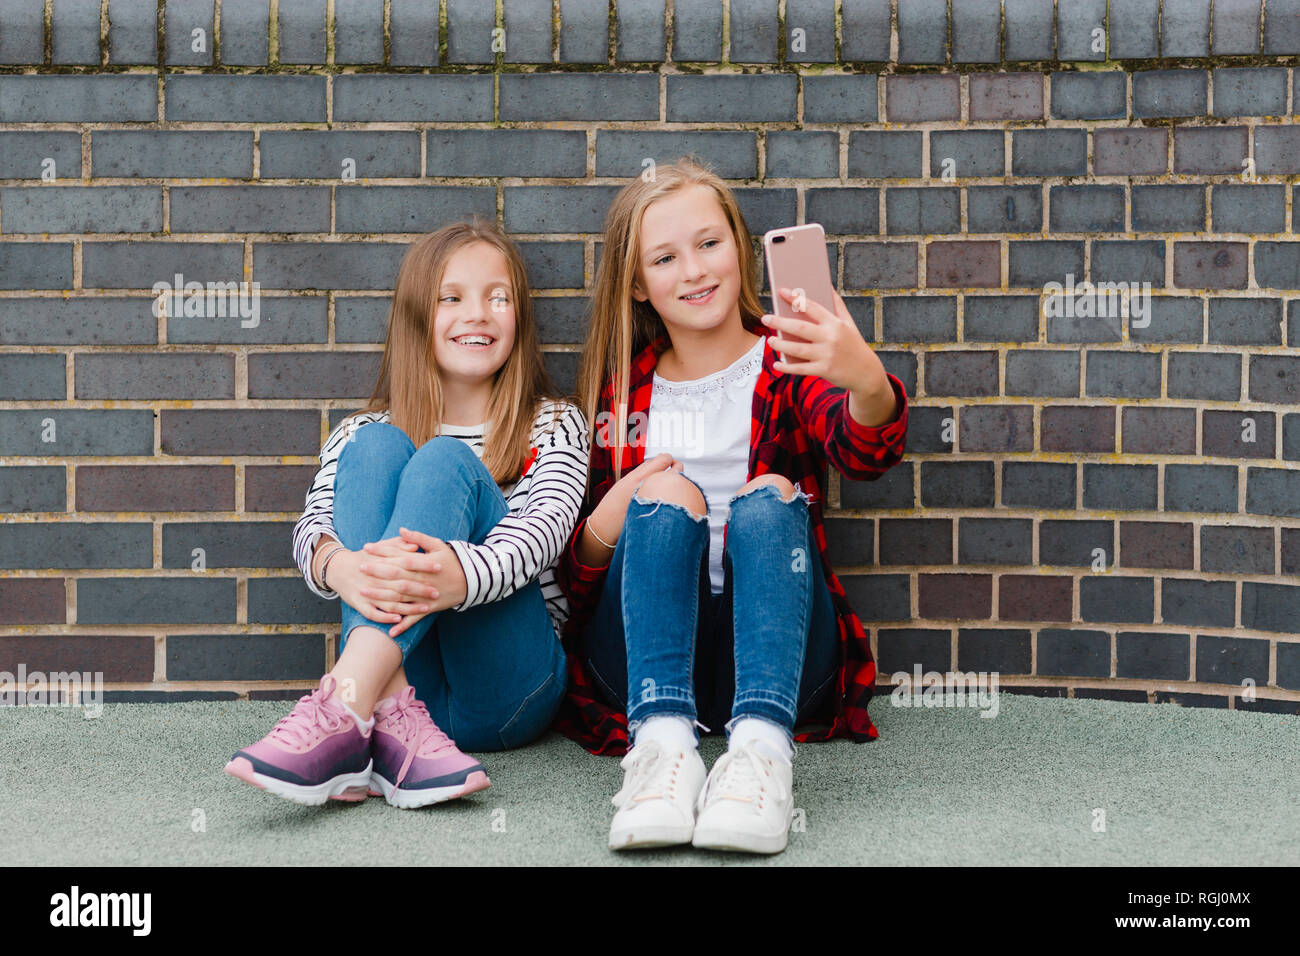 Portrait of two smiling girls sitting in front of brick wall taking selfie with smartphone Stock Photo